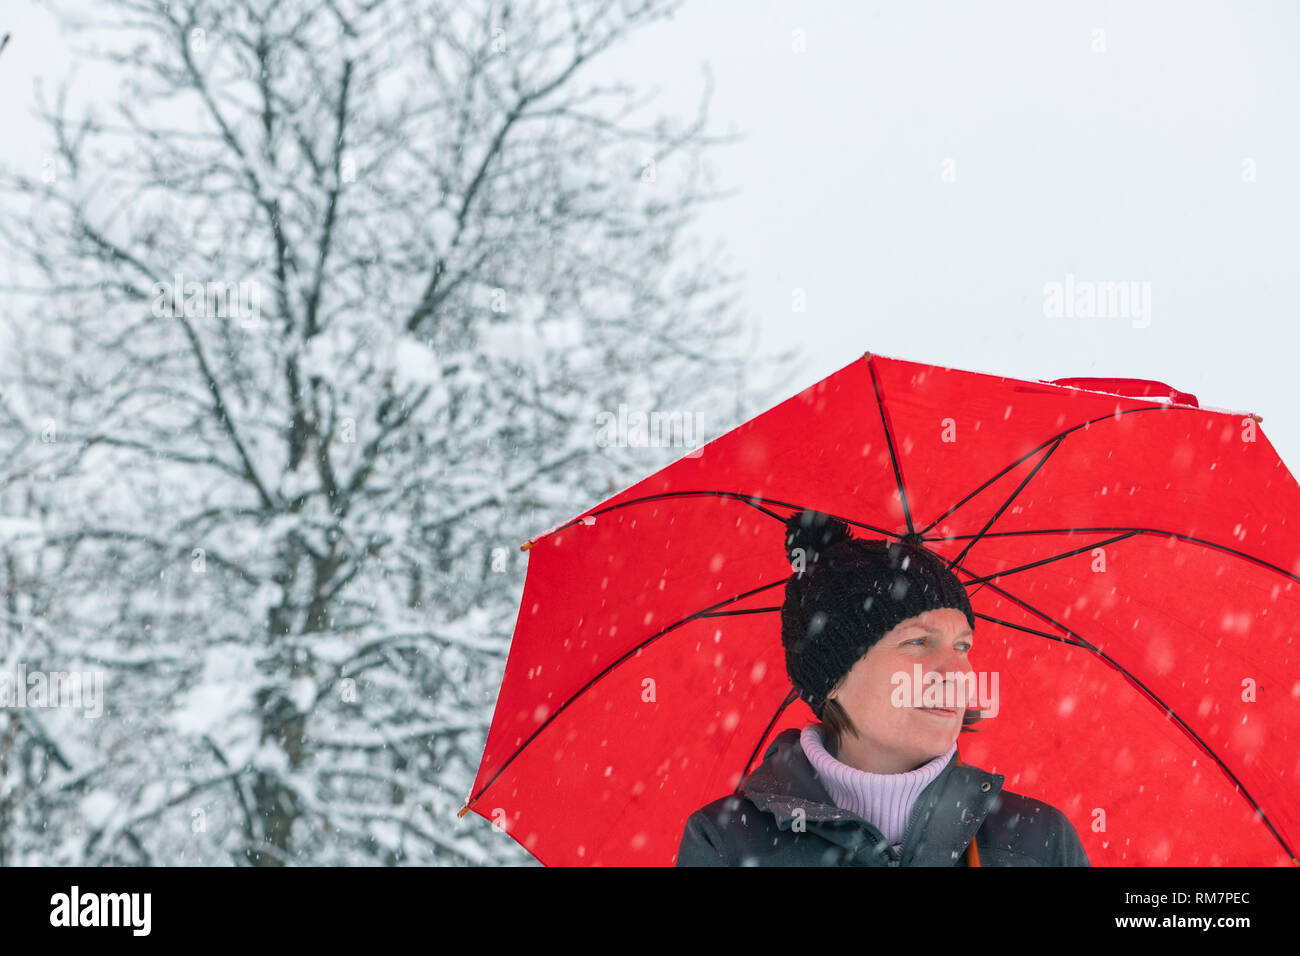 Sad disappointed woman in standing in winter snow under big red umbrella Stock Photo